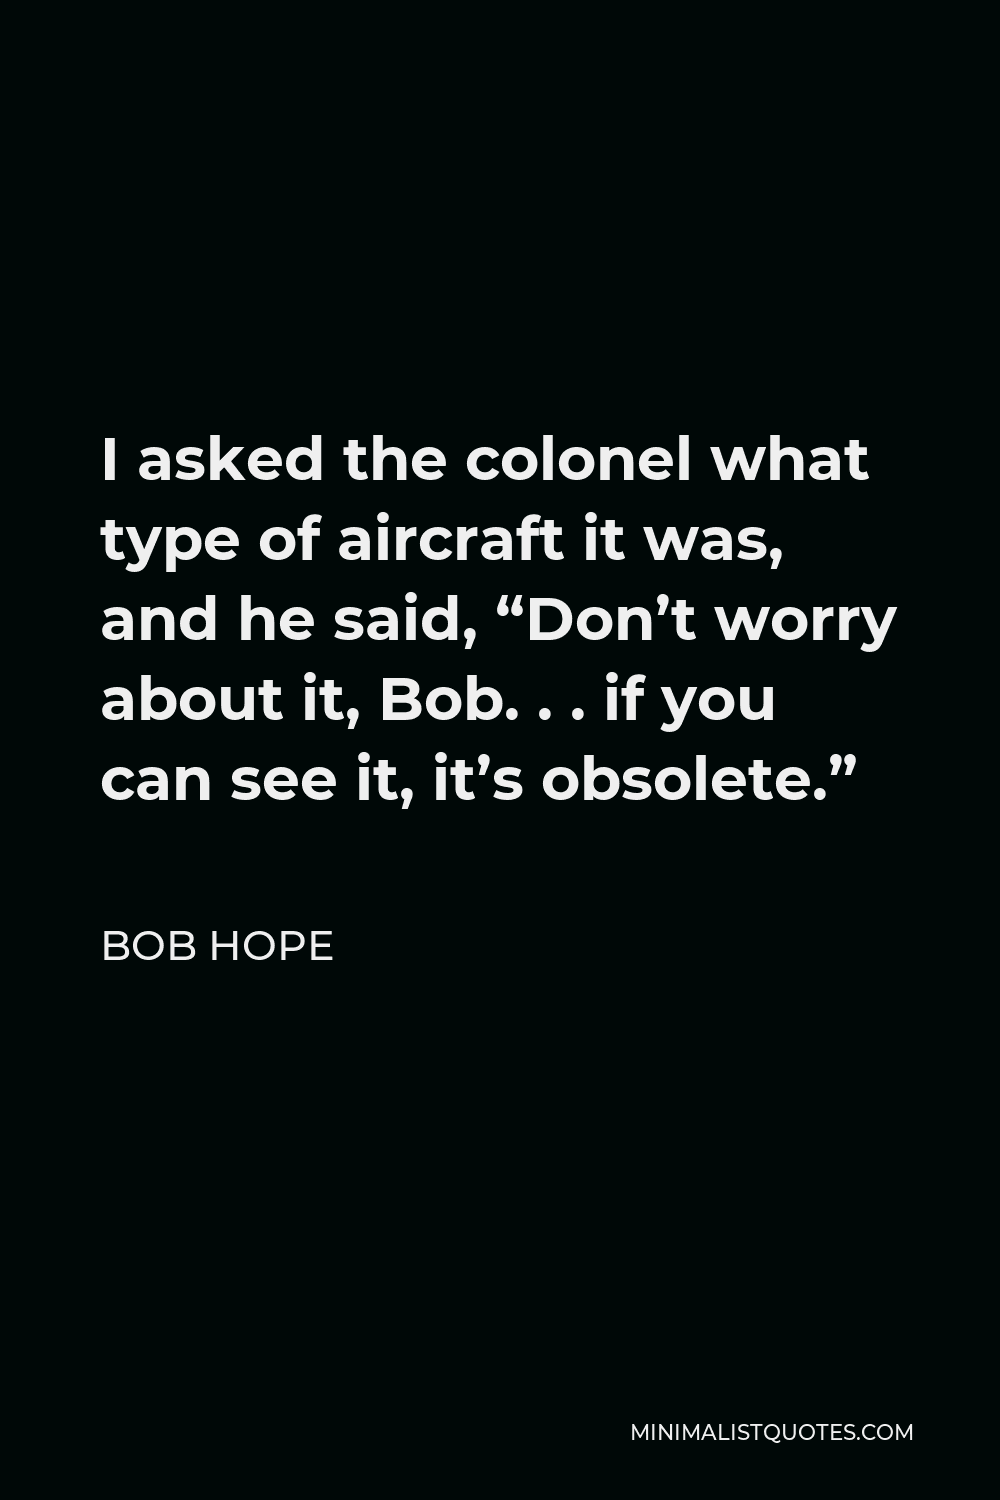 Bob Hope Quote - I asked the colonel what type of aircraft it was, and he said, “Don’t worry about it, Bob. . . if you can see it, it’s obsolete.”